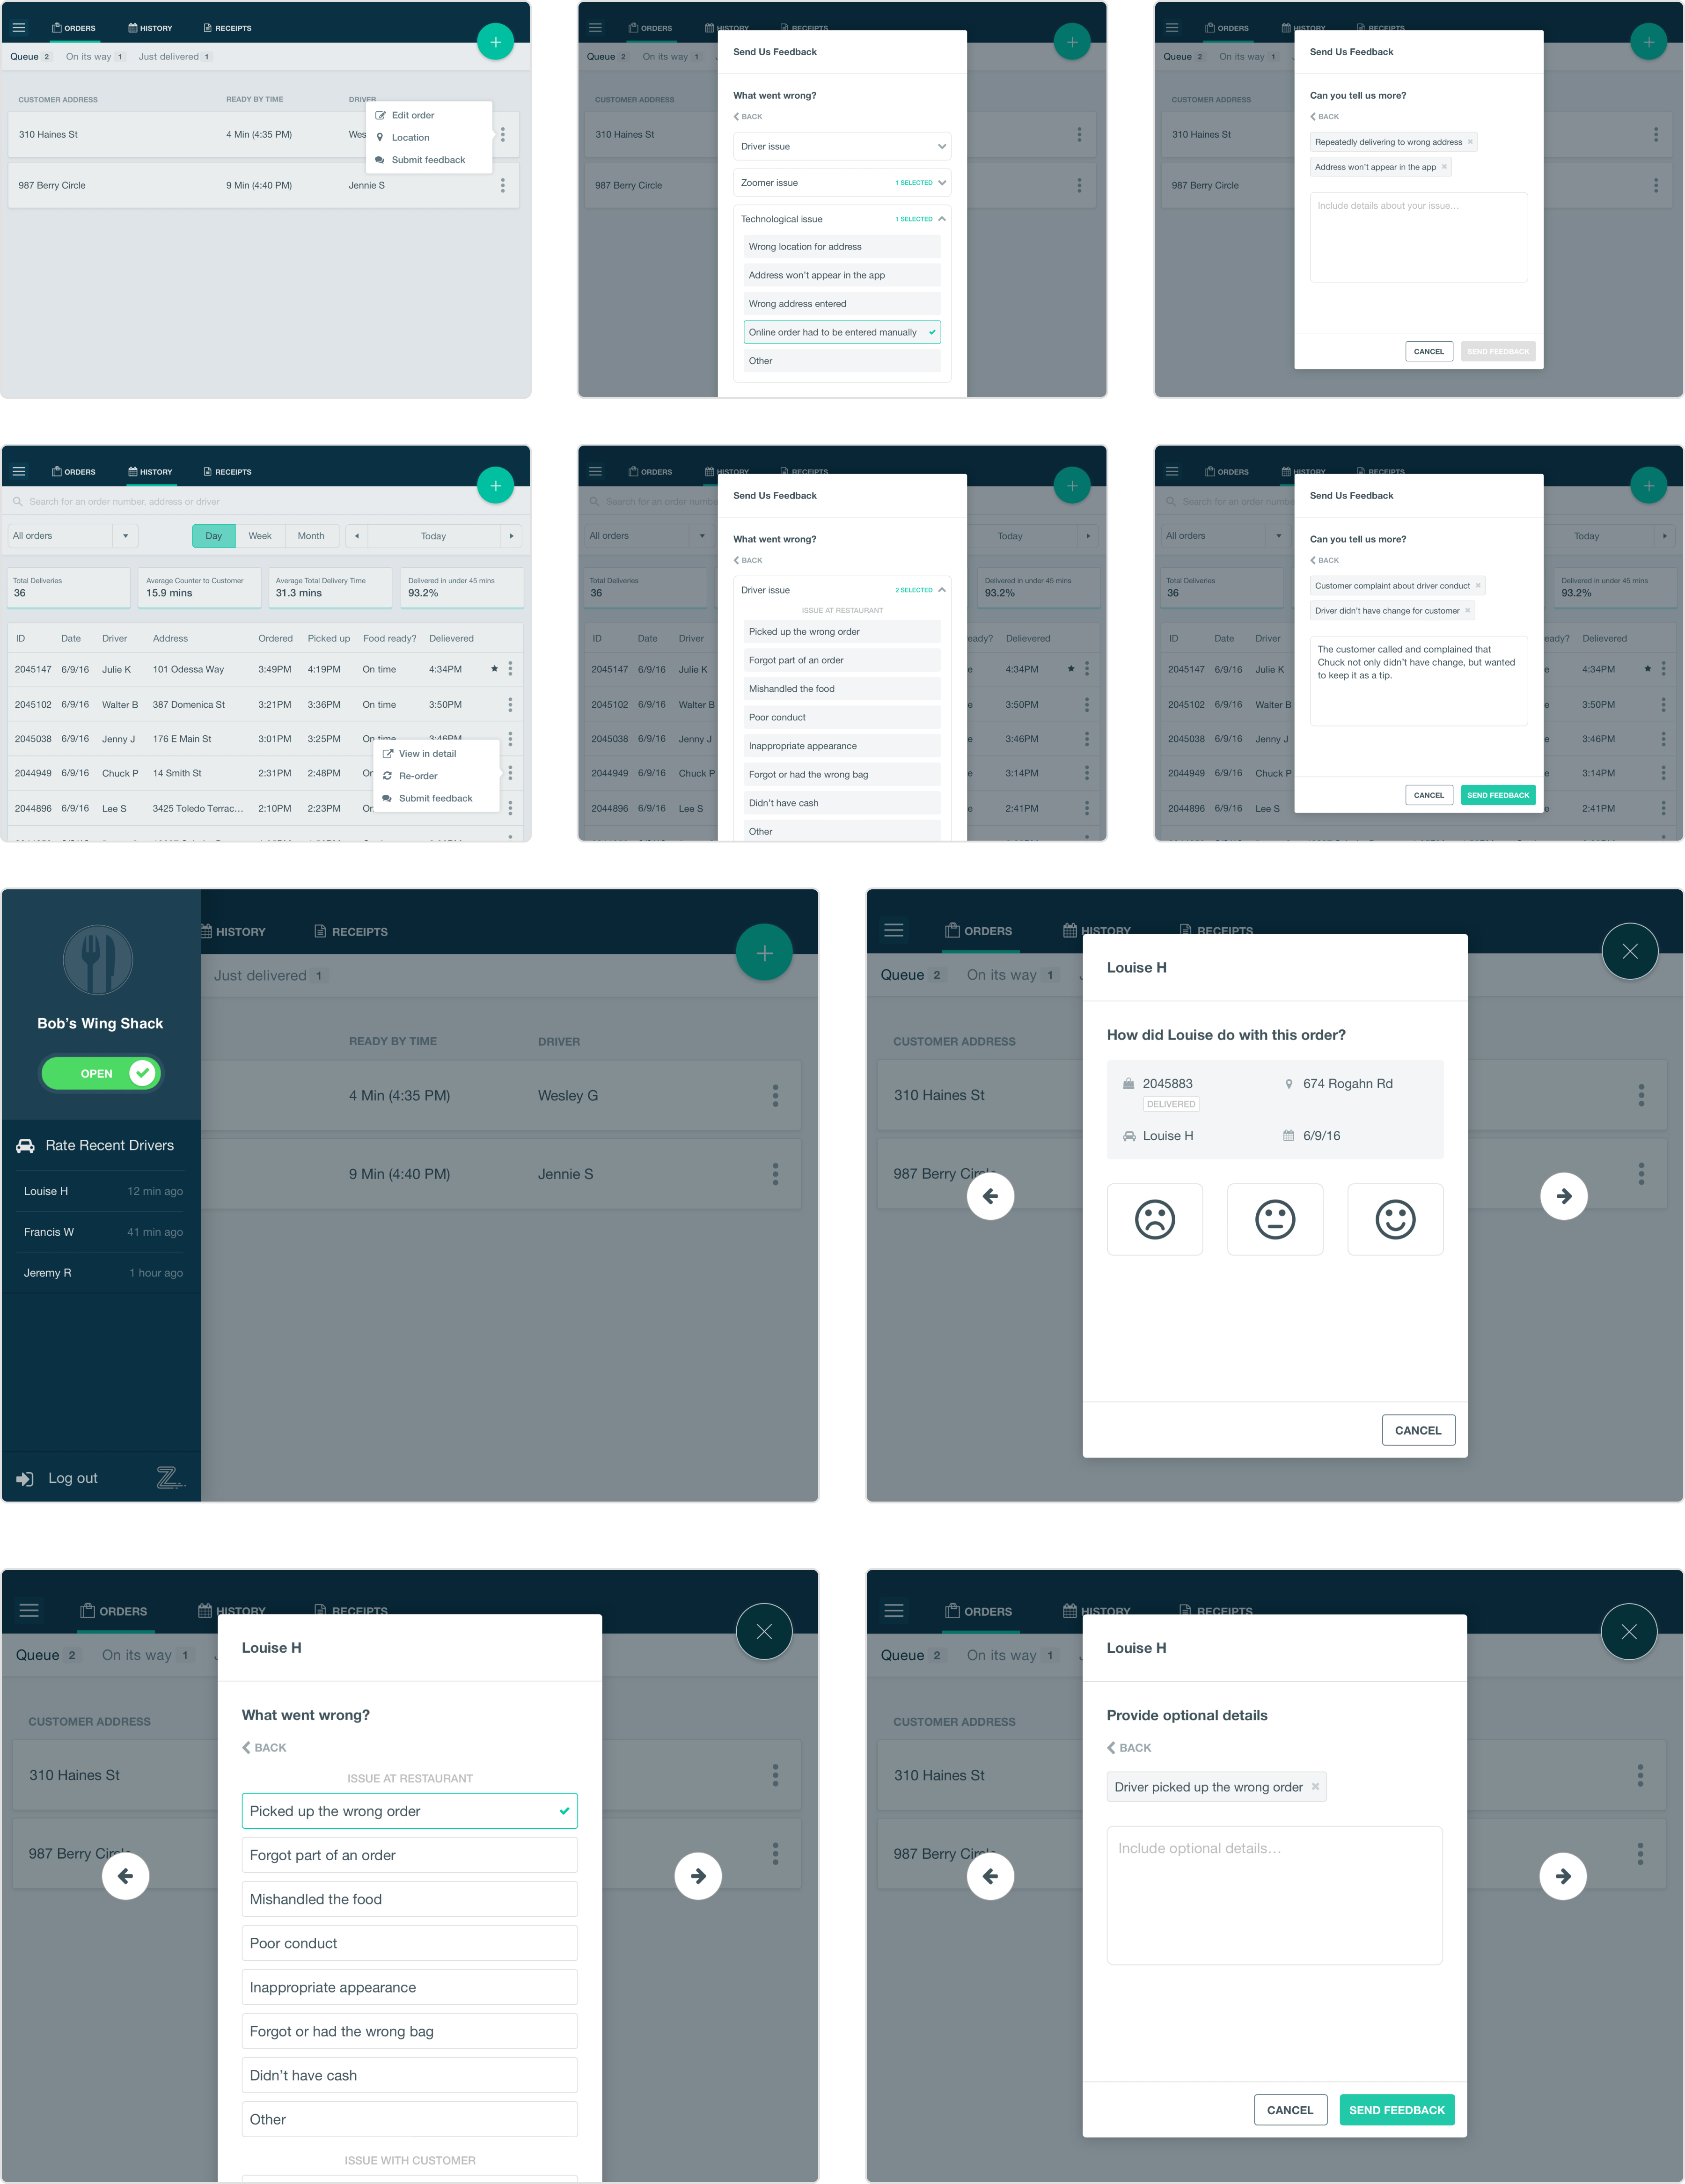 Screenshots of different scenarios from our usability test